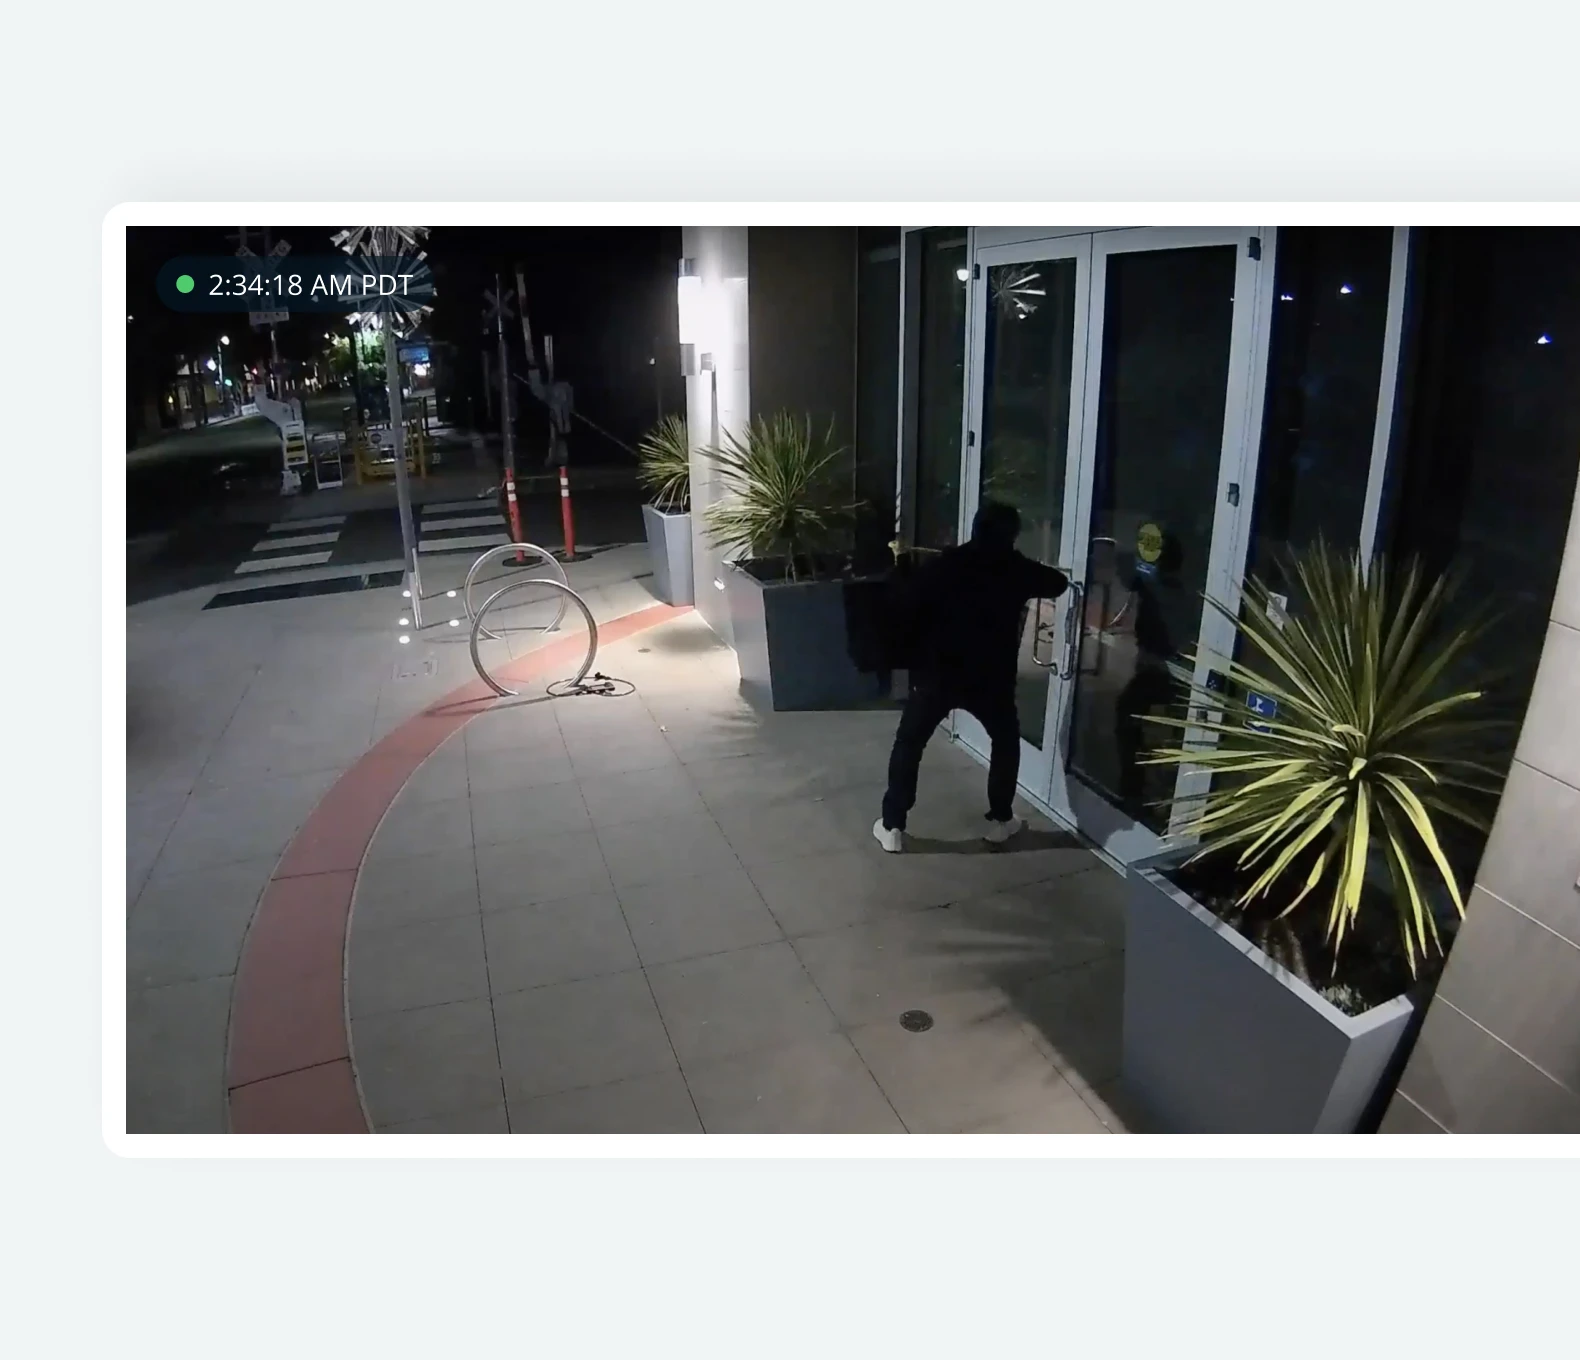 Man breaking into business as captured by live video monitoring